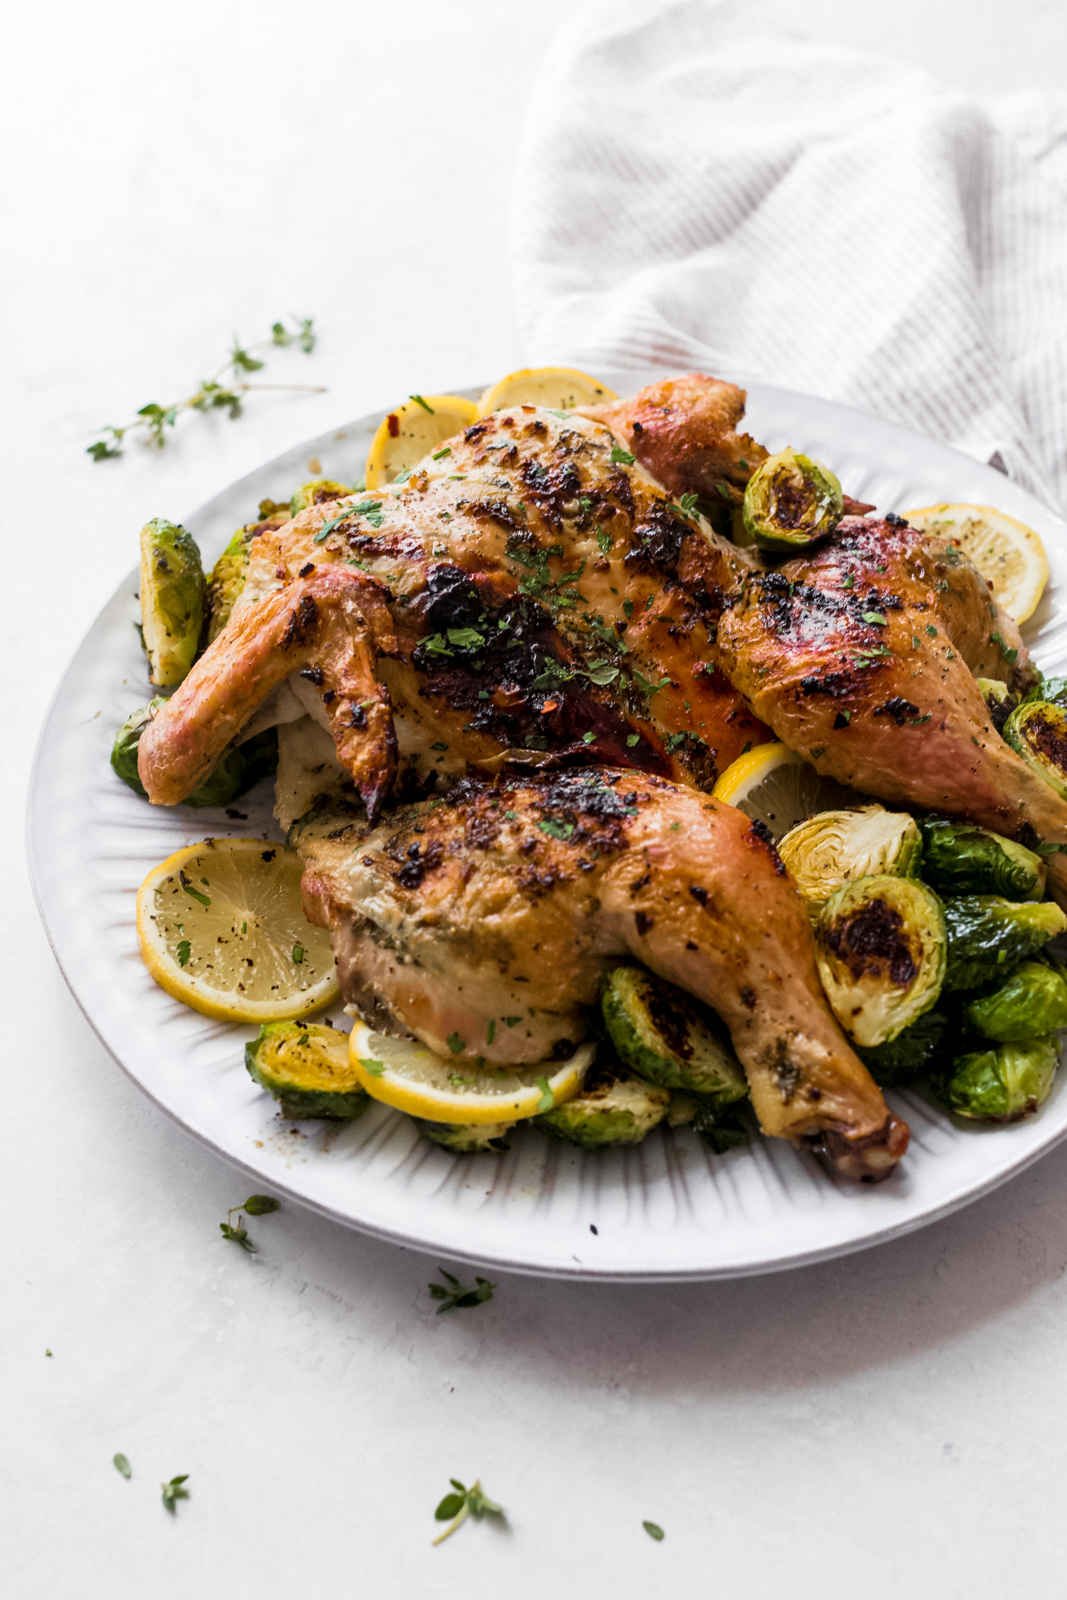 plate with prepared roasted chicken with lemon and Brussel sprouts on grey surface